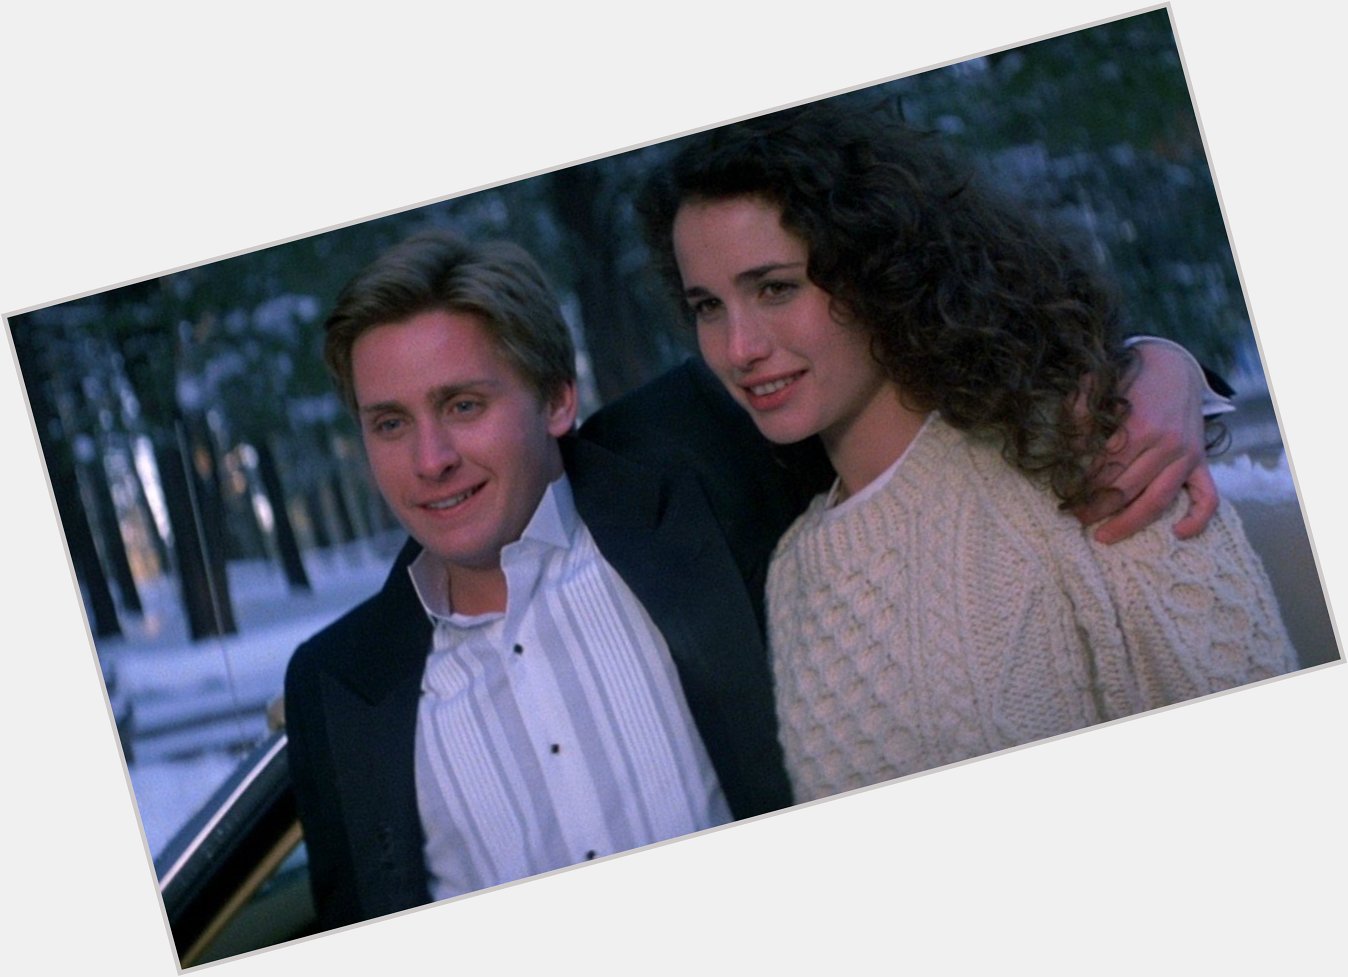 Happy 64th birthday to the one and only Andie MacDowell! 